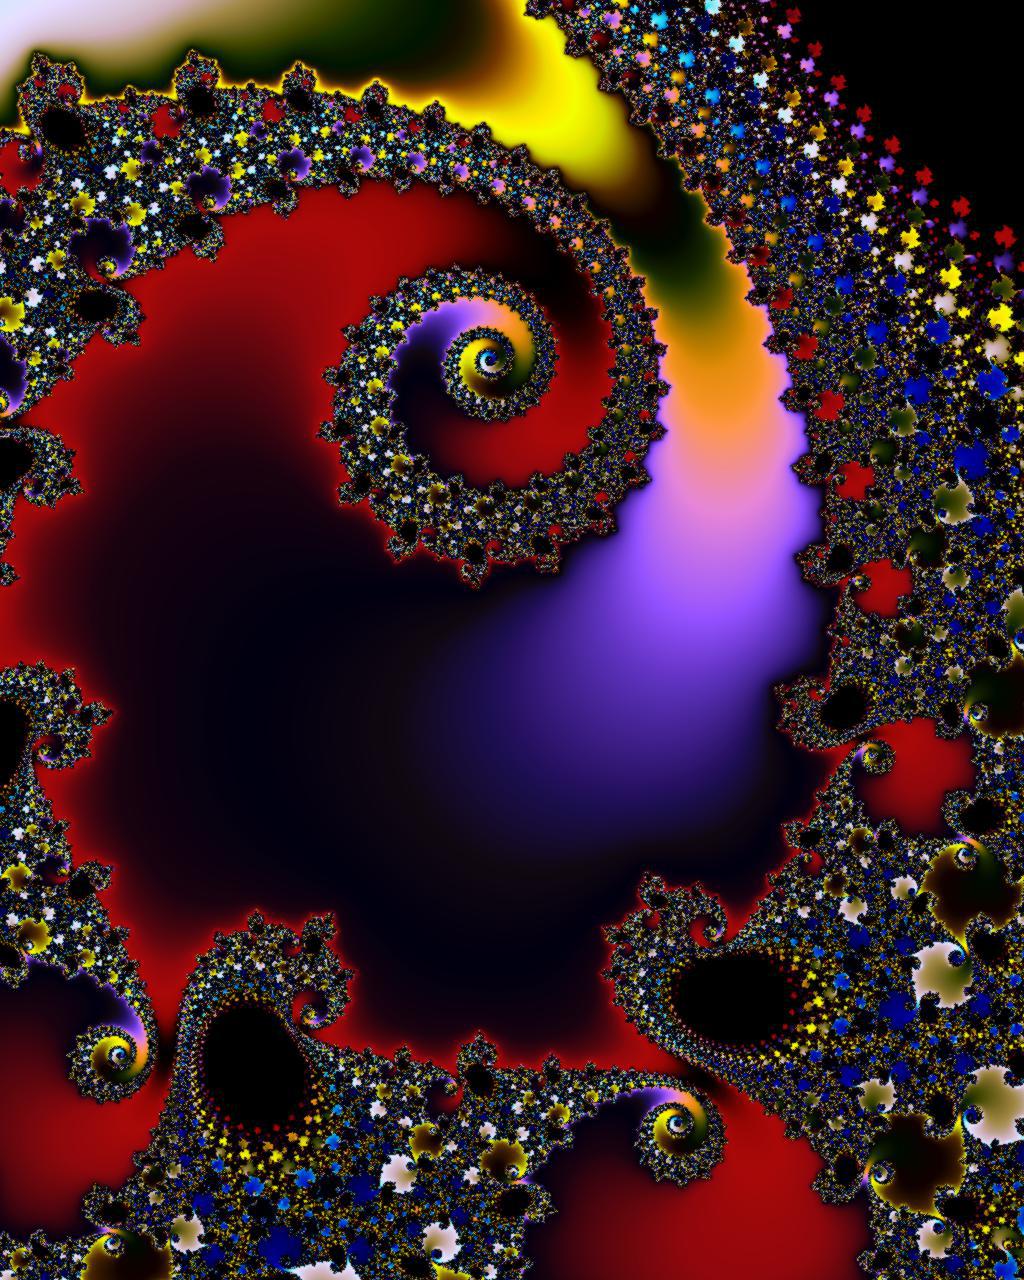 jalada Fractal - Your introduction to the mysterious world of fractal geometry.